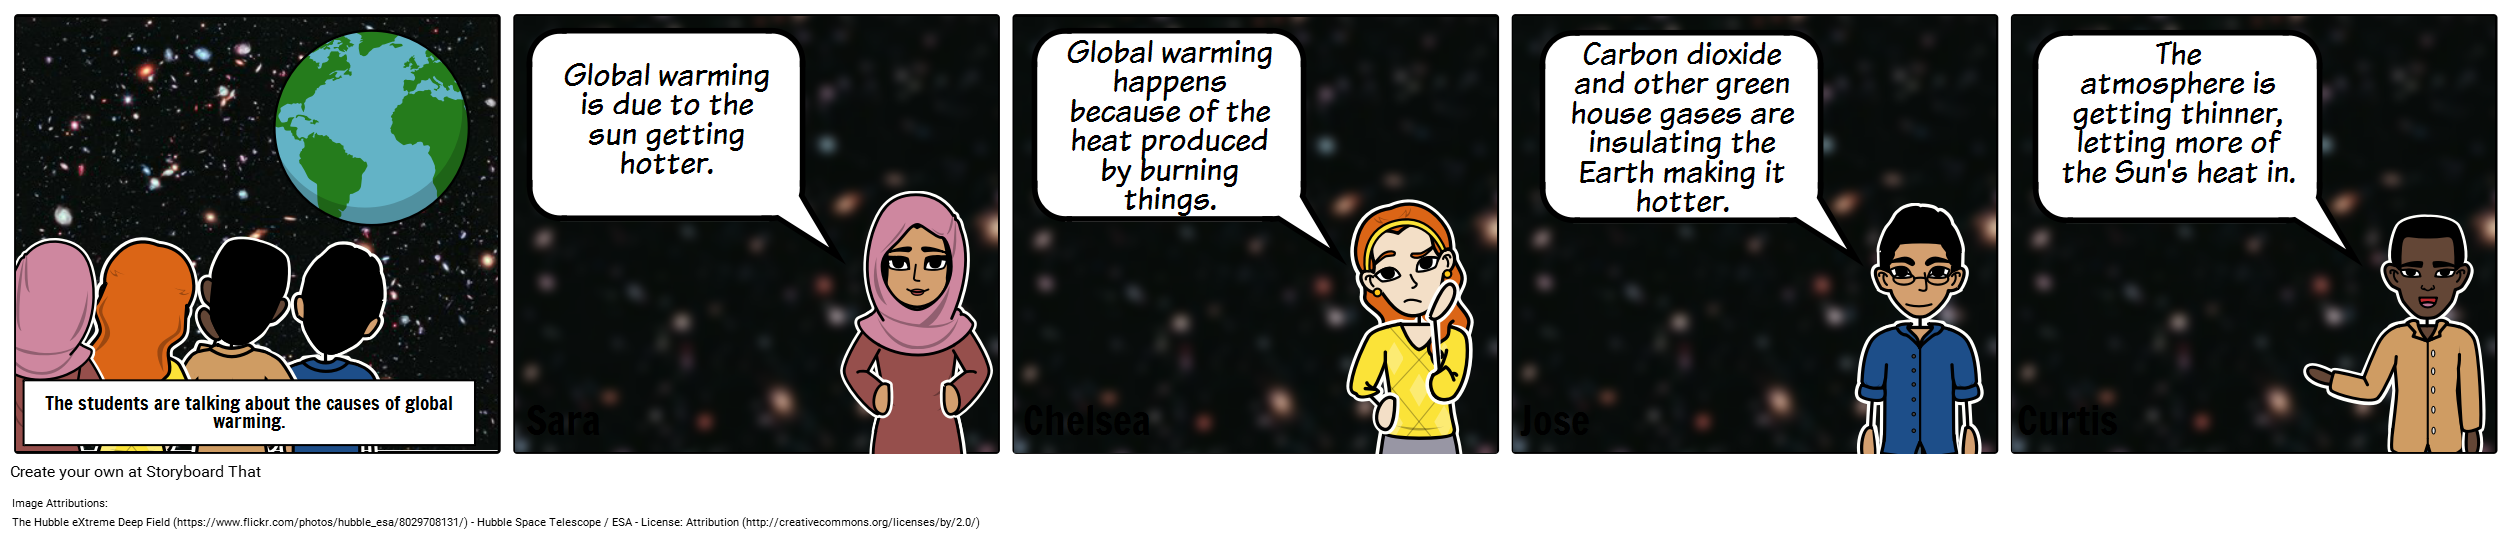 Discussion Storyboard on Global Warming - Hign School